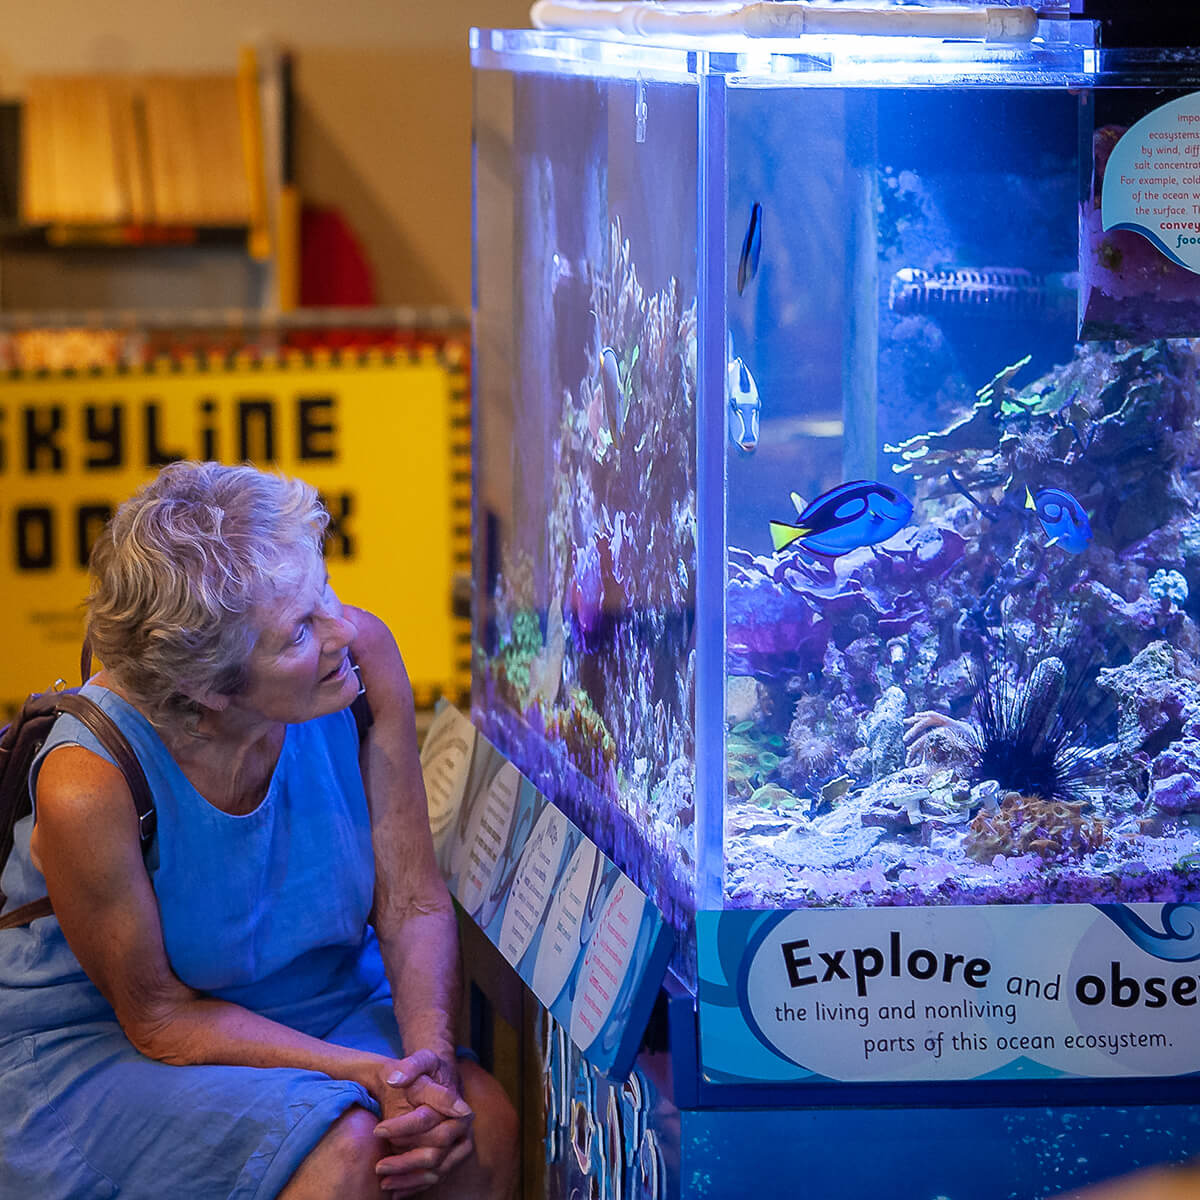 A lady is seated while she observes the coral reef aquarium, one of Wonderlab's exhibits